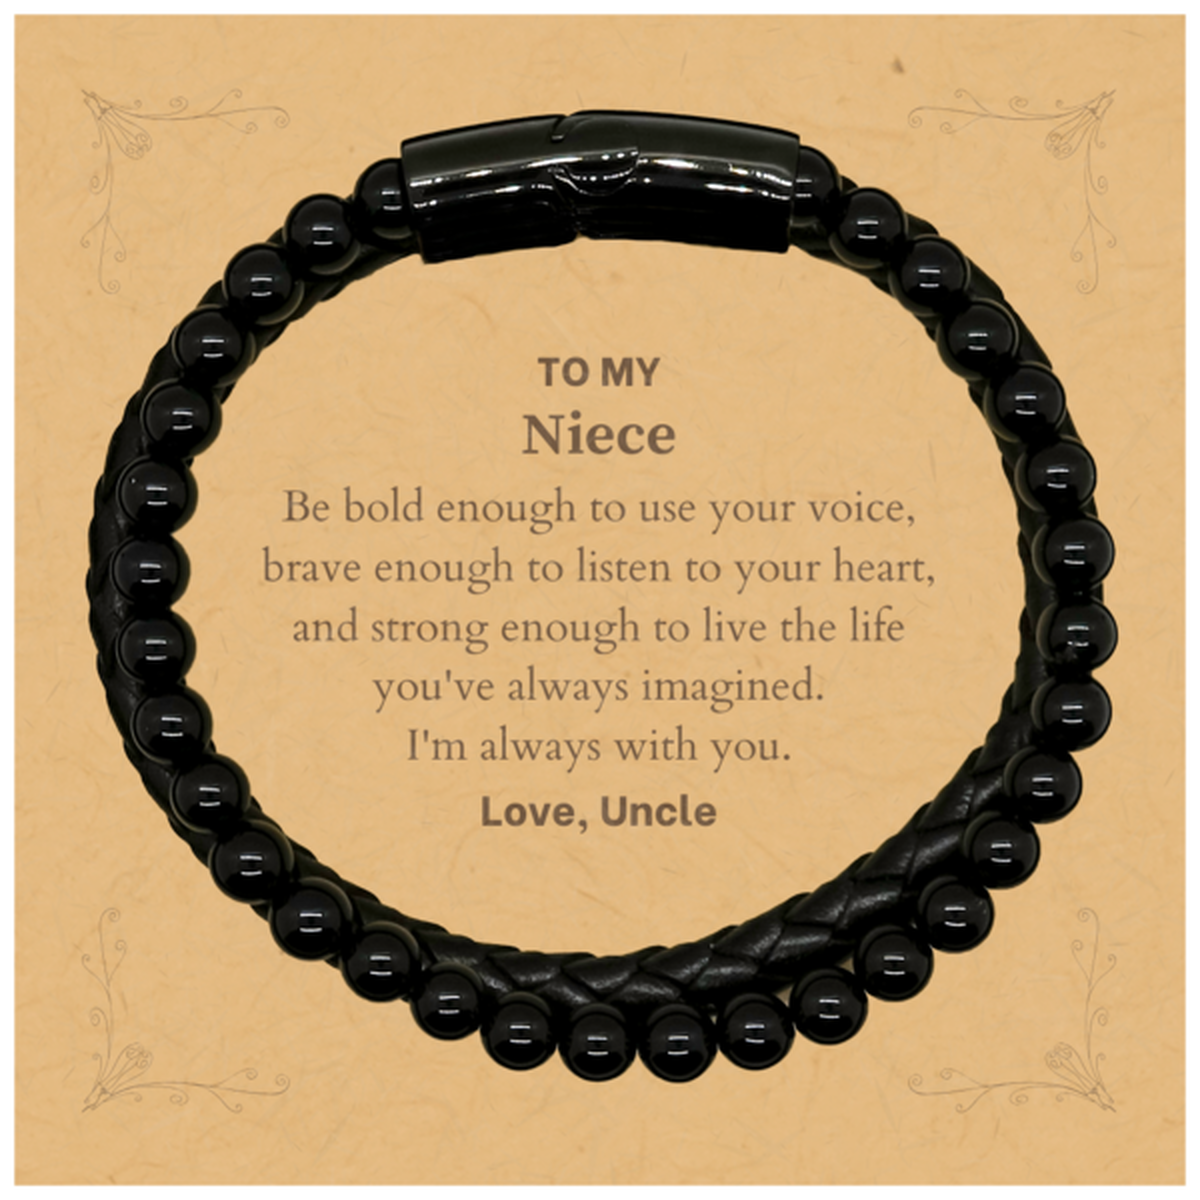 Keepsake Niece Stone Leather Bracelets Gift Idea Graduation Christmas Birthday Niece from Uncle, Niece Be bold enough to use your voice, brave enough to listen to your heart. Love, Uncle